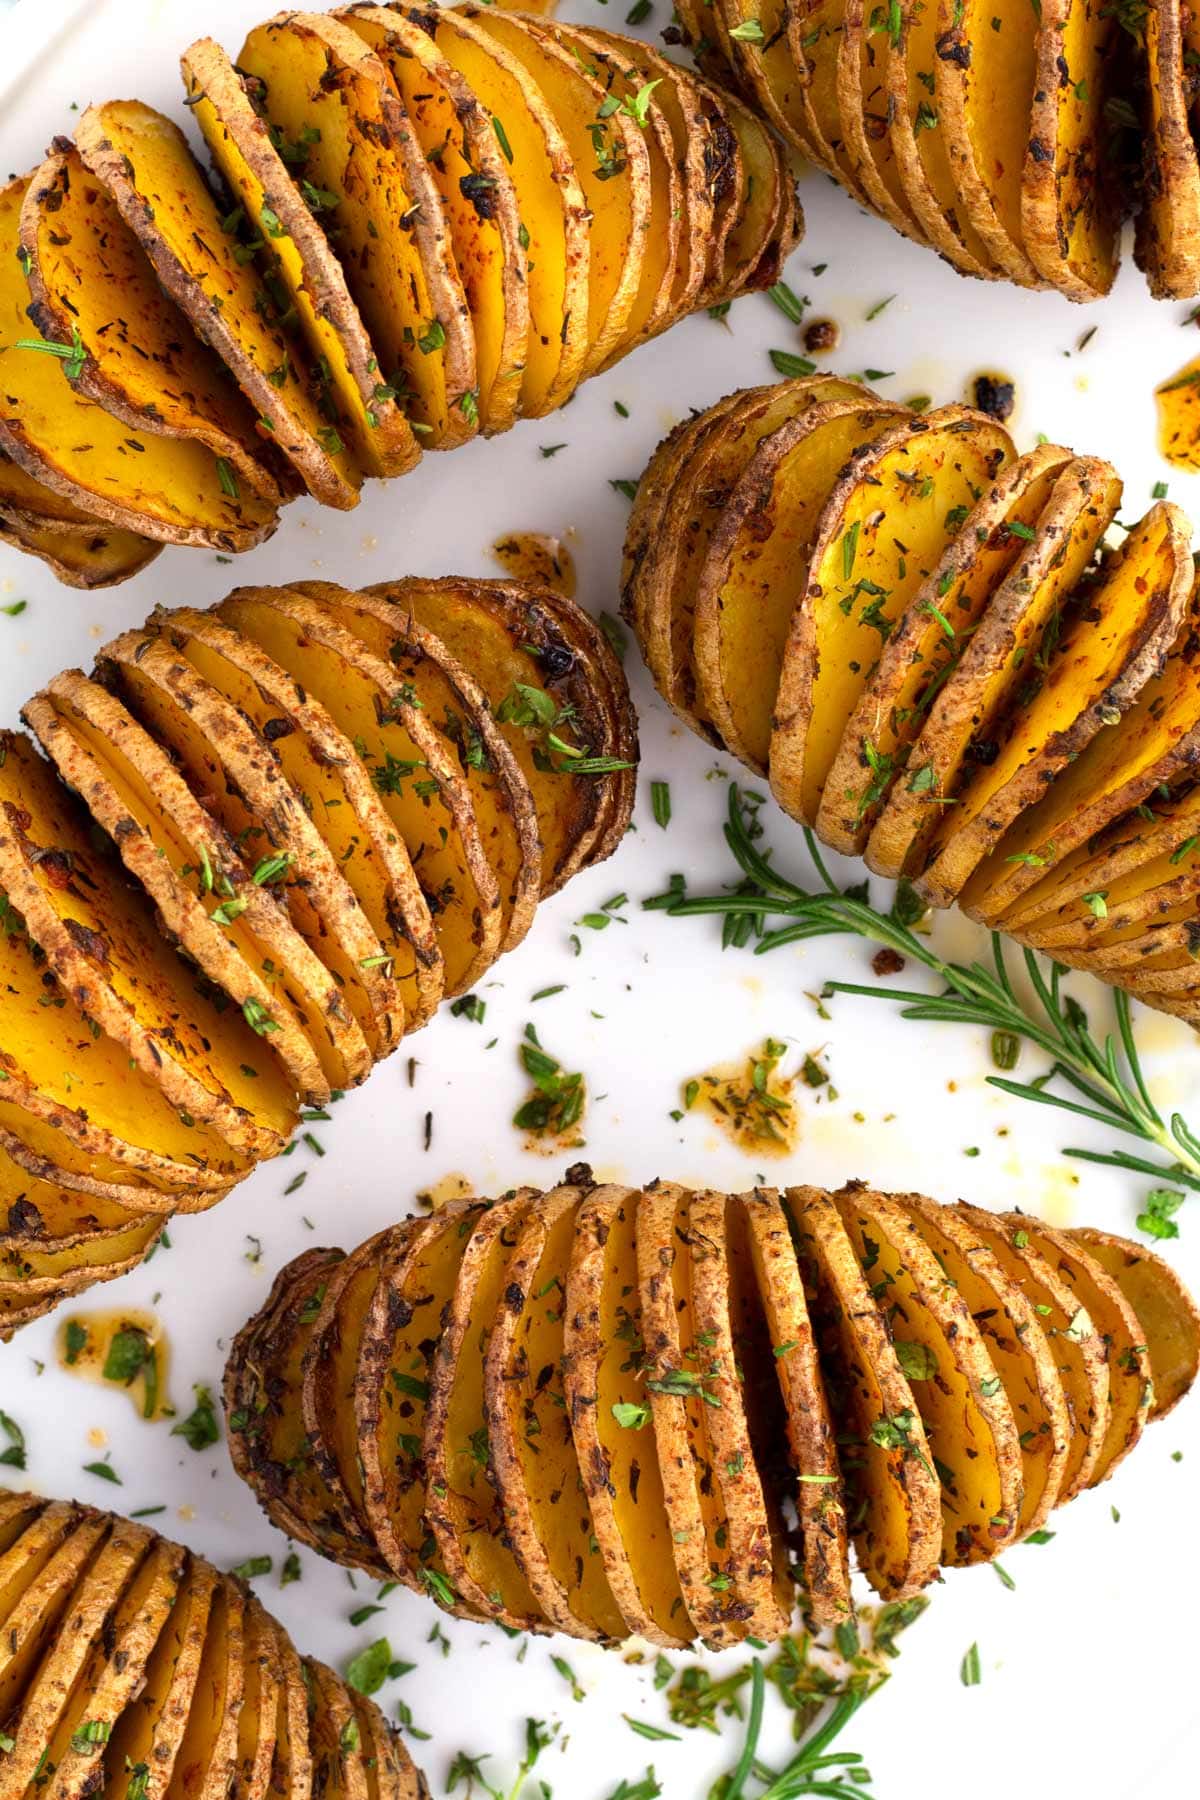 Overhead of six golden brown hasselback potatoes sprinkled with fresh herbs.